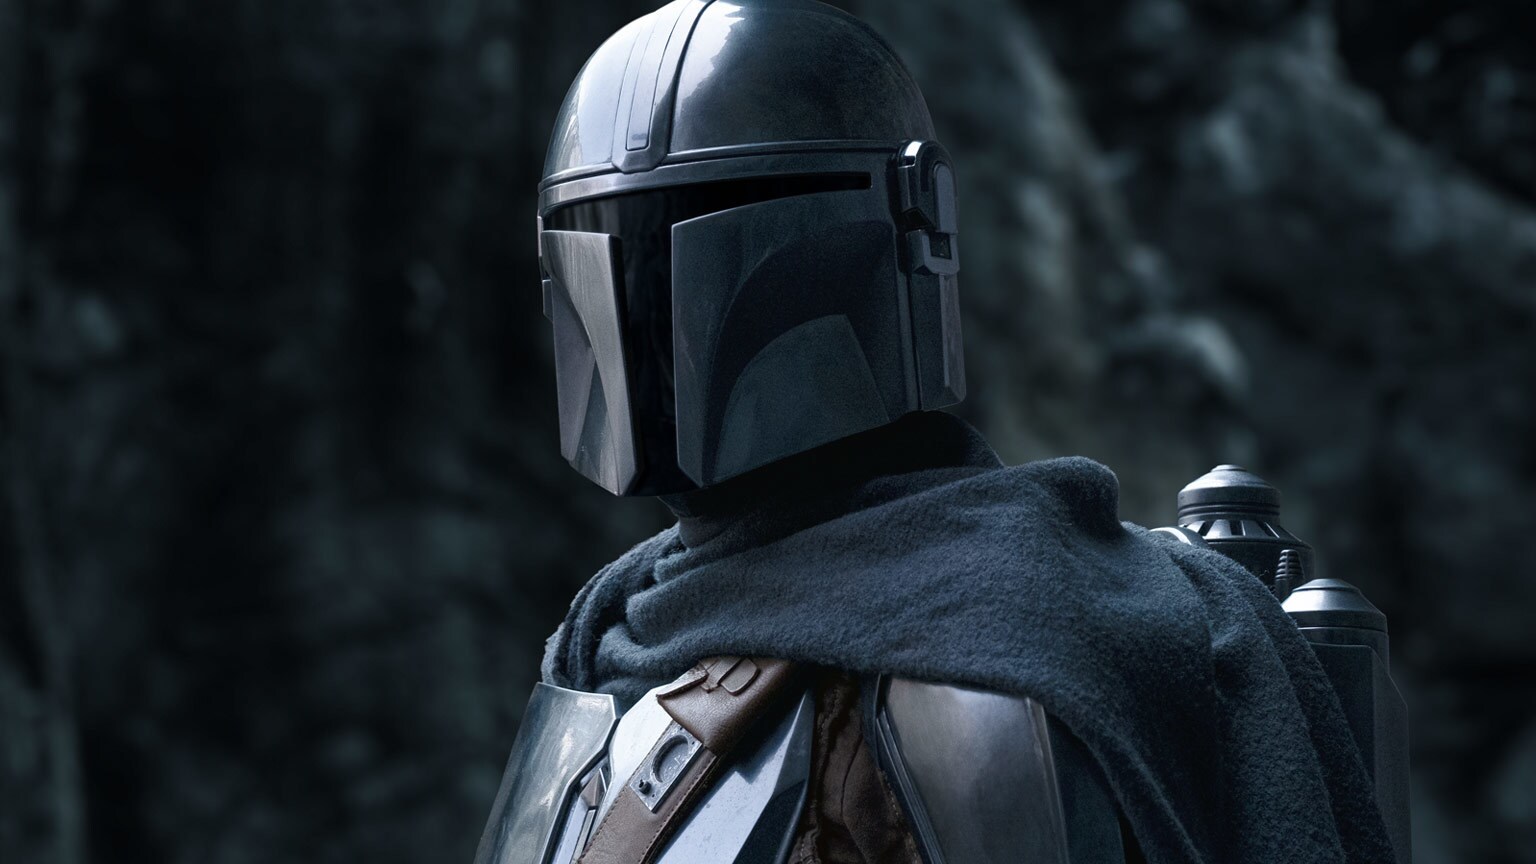 Is Pedro Pascal In 'The Mandalorian' Suit? Sometimes